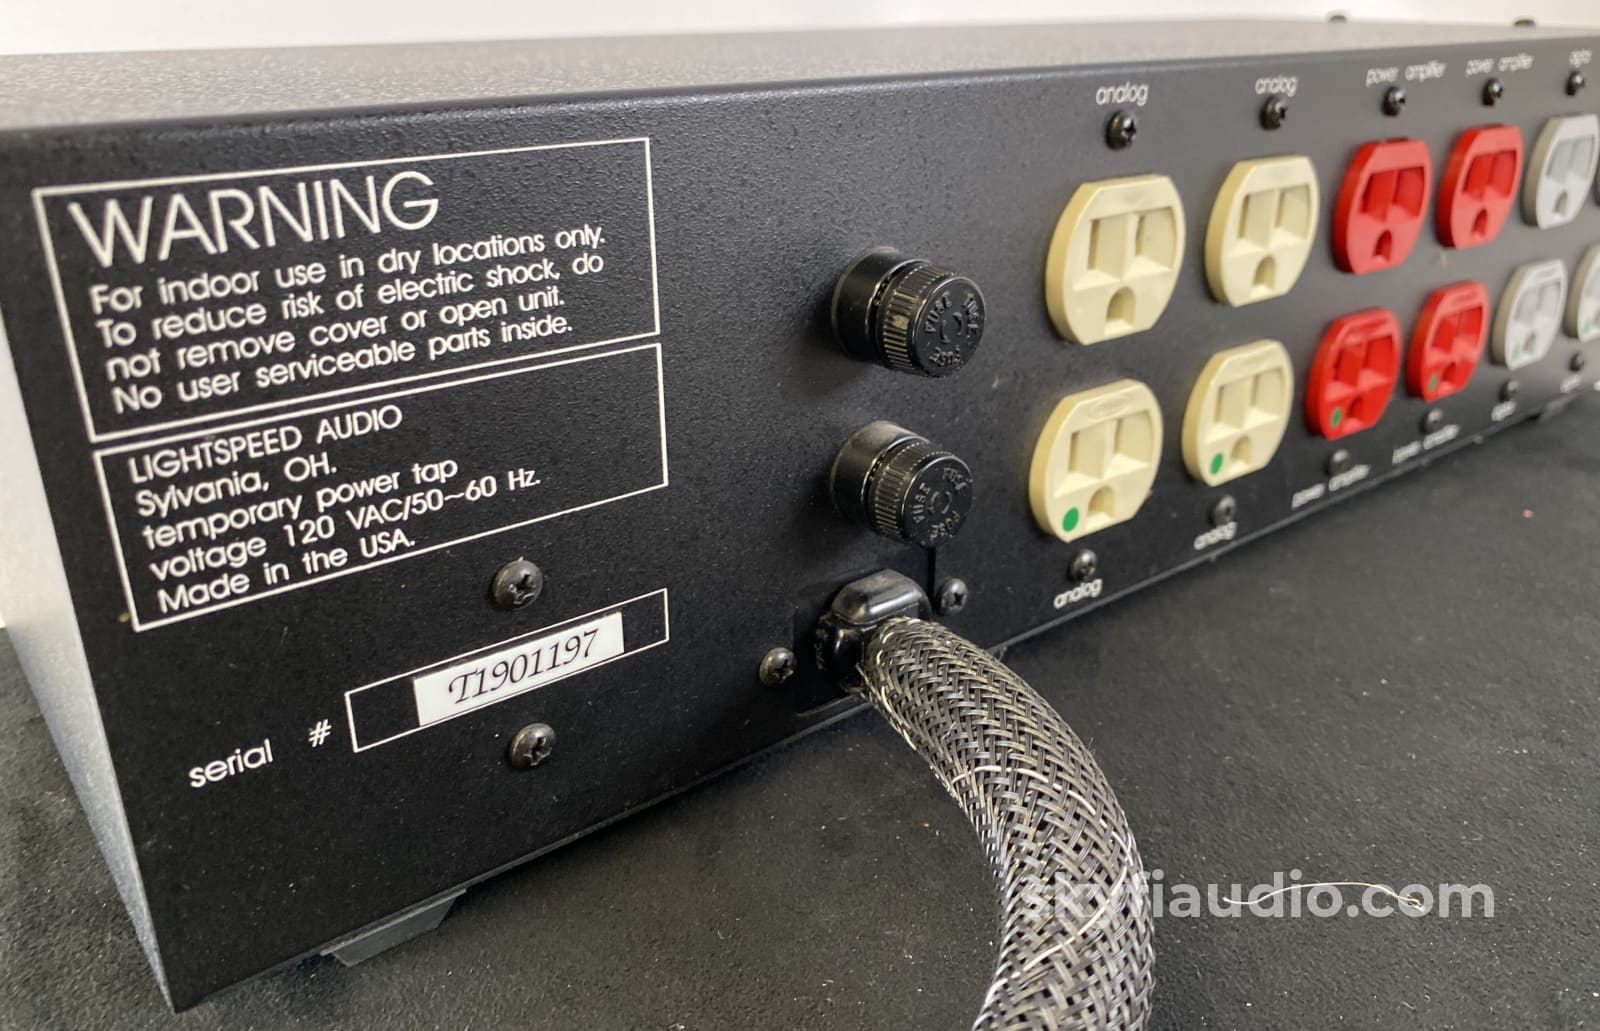 Michael Chang Lightspeed Cls Ht 1000 Mkii Powerline Filter With Long Cable Power Conditioner